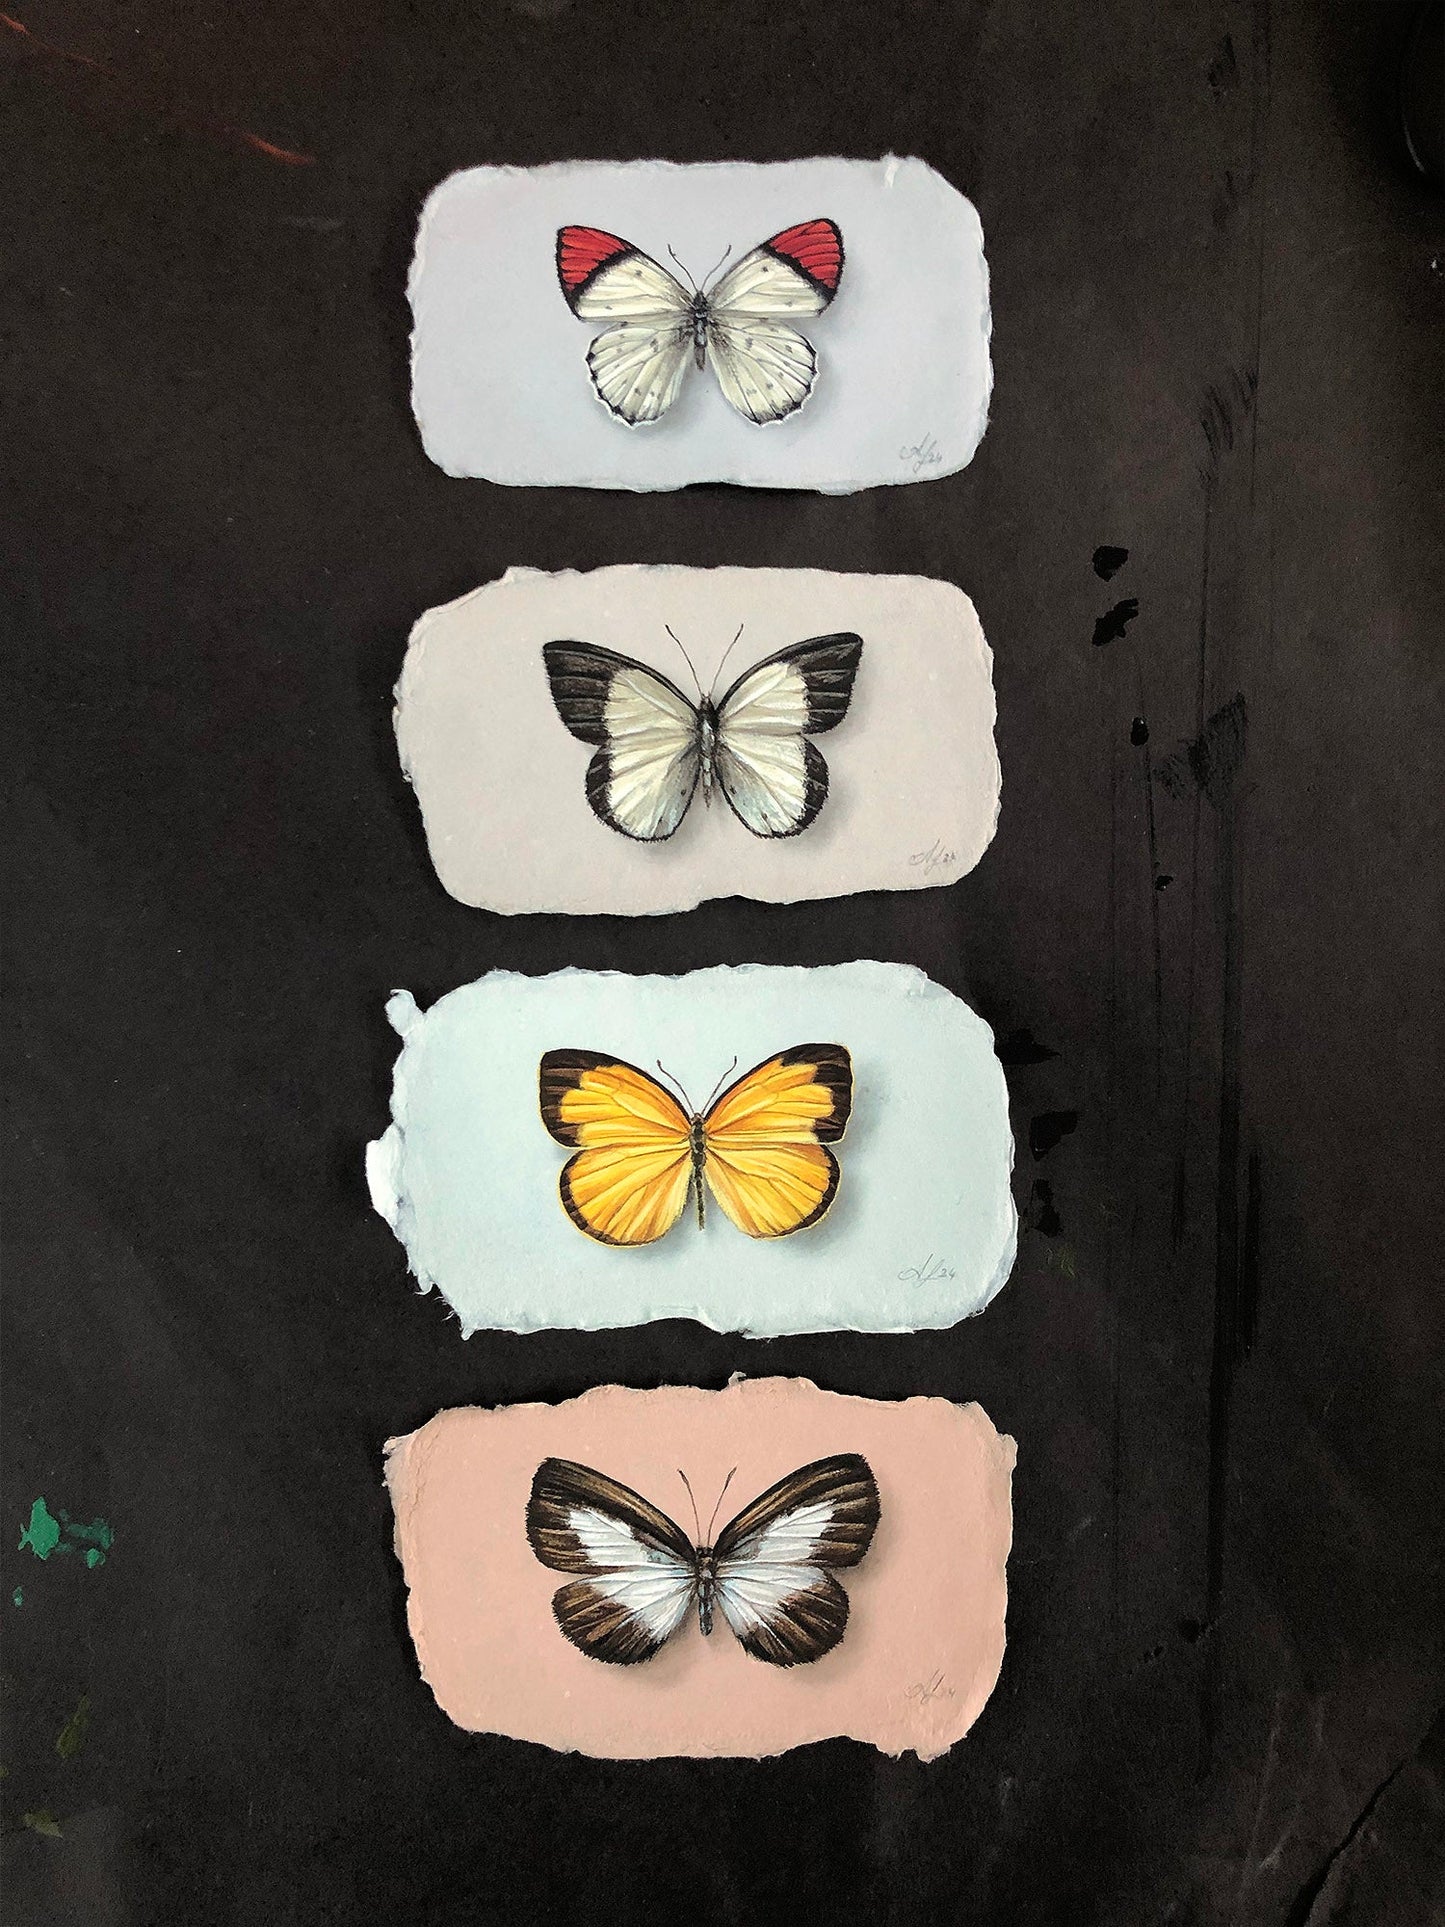 Butterfly on Handmade Paper #2 - 4.5 x 2.5"